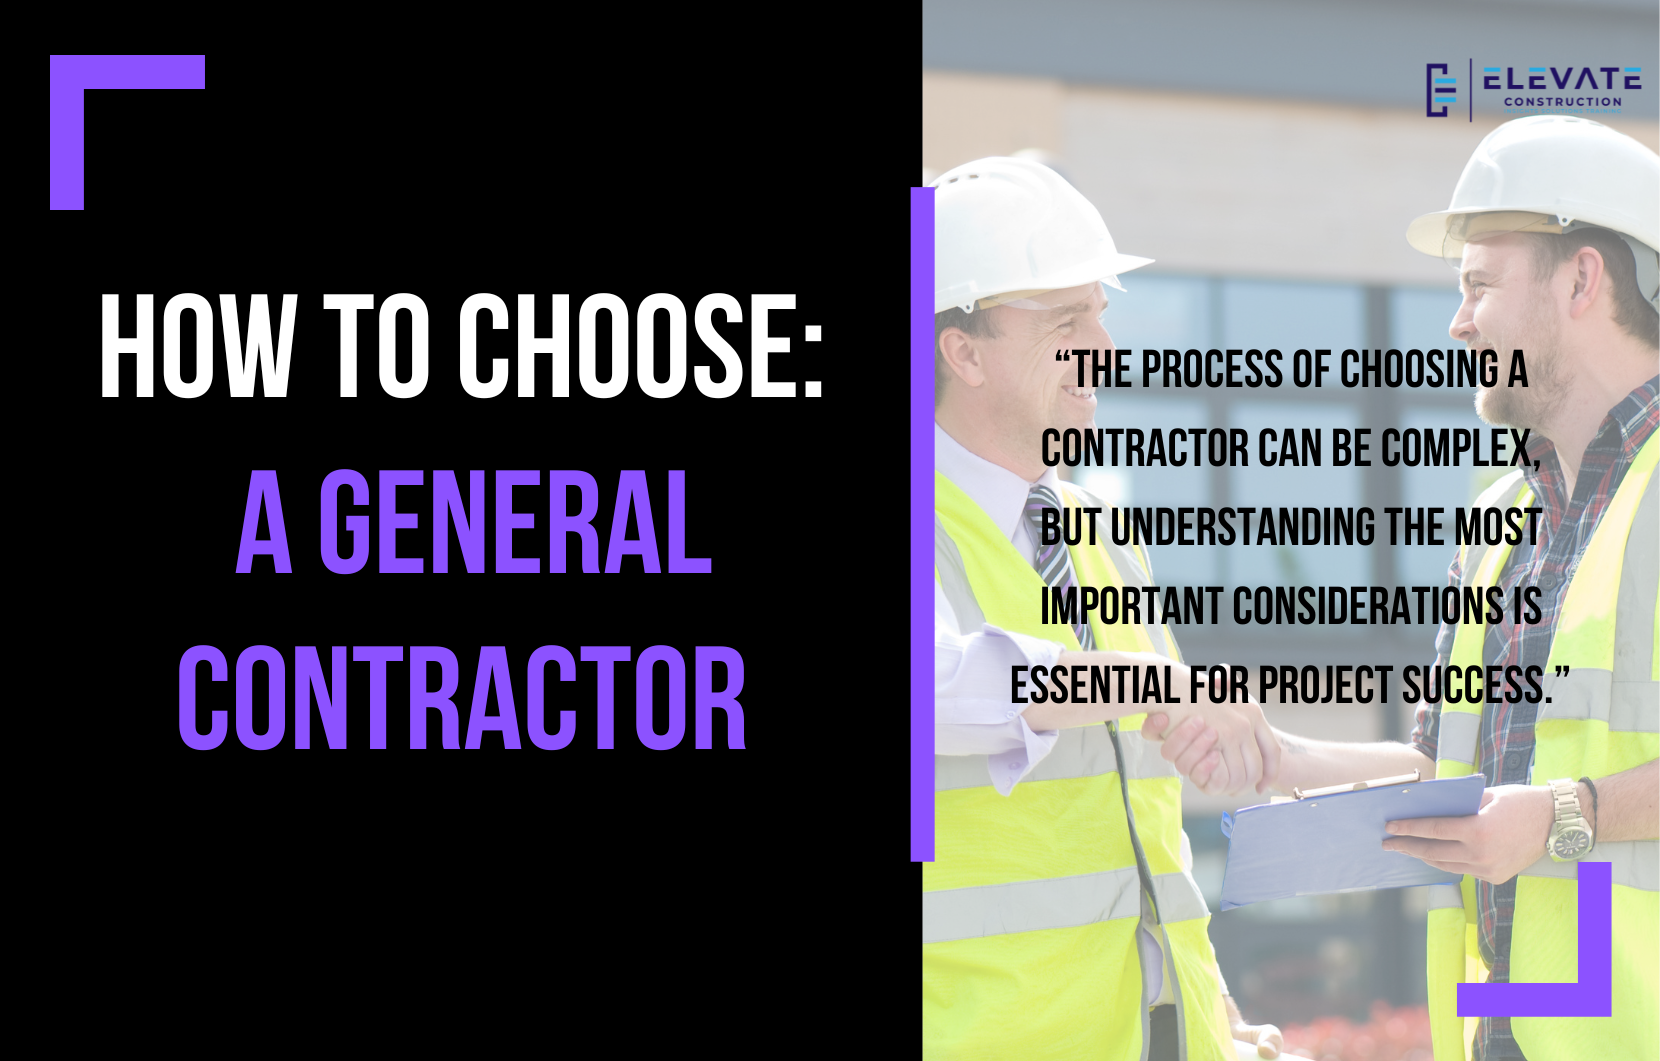 How to choose a general contractor